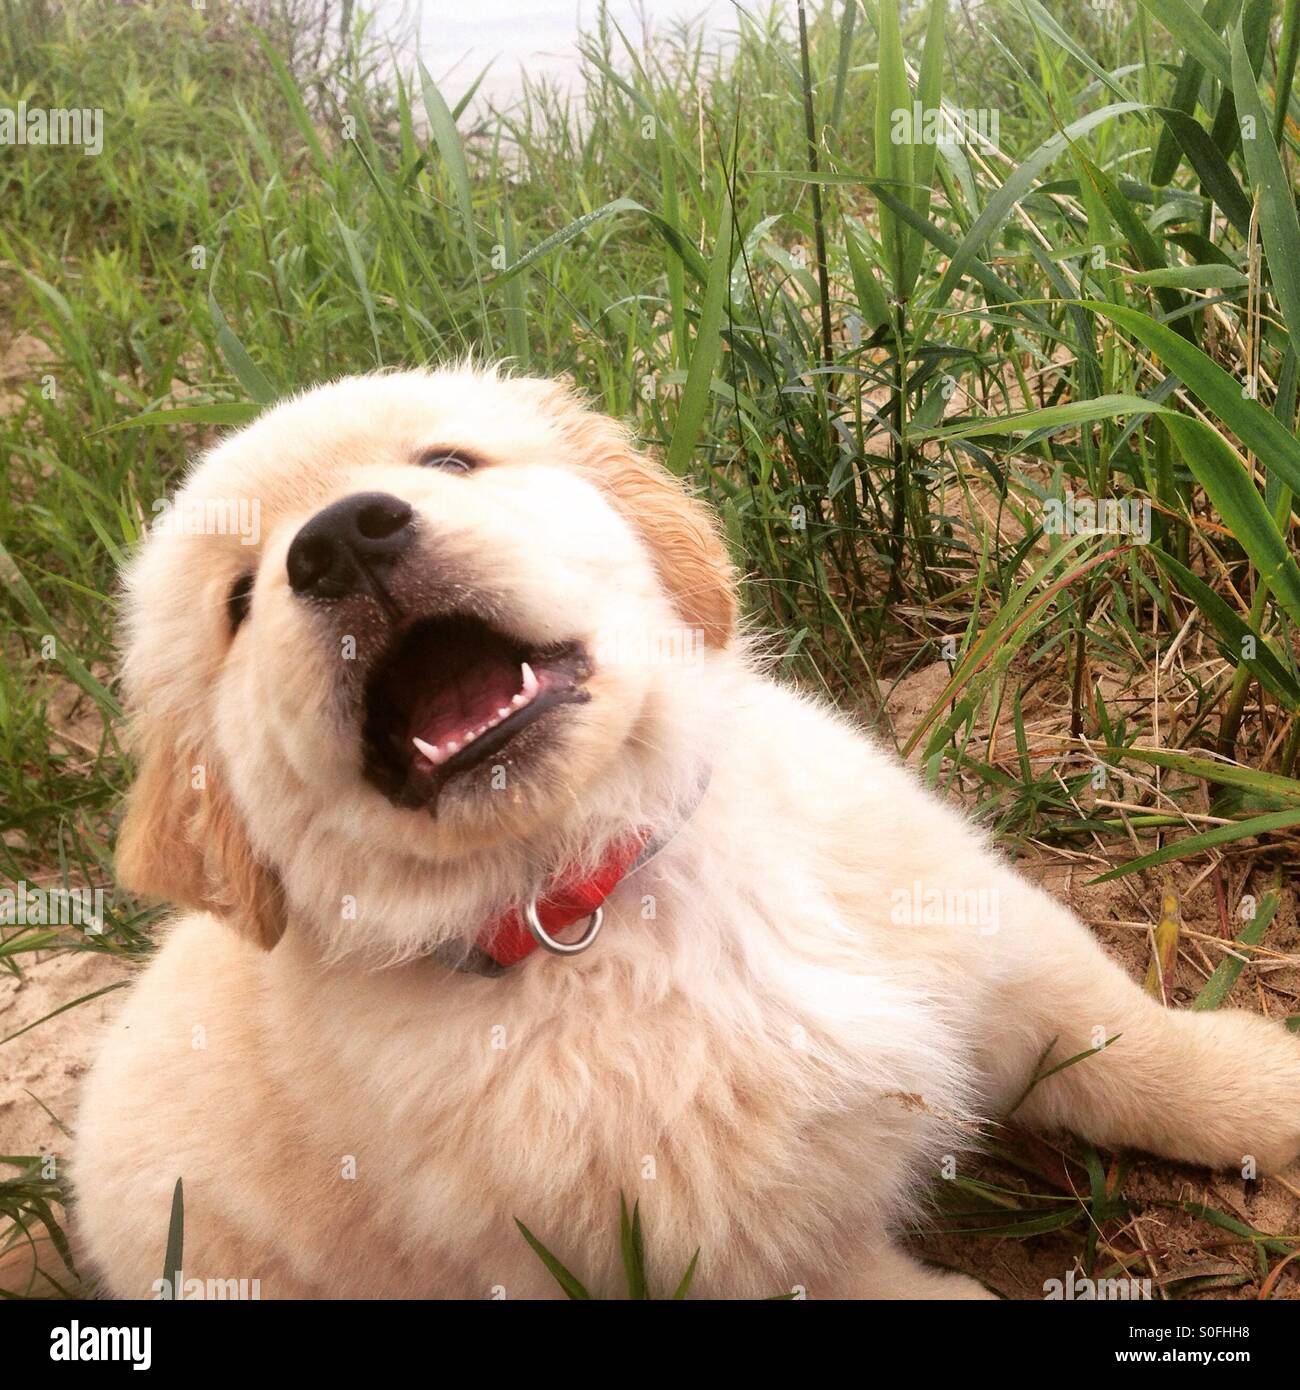 Angry golden retriever puppy Stock Photo